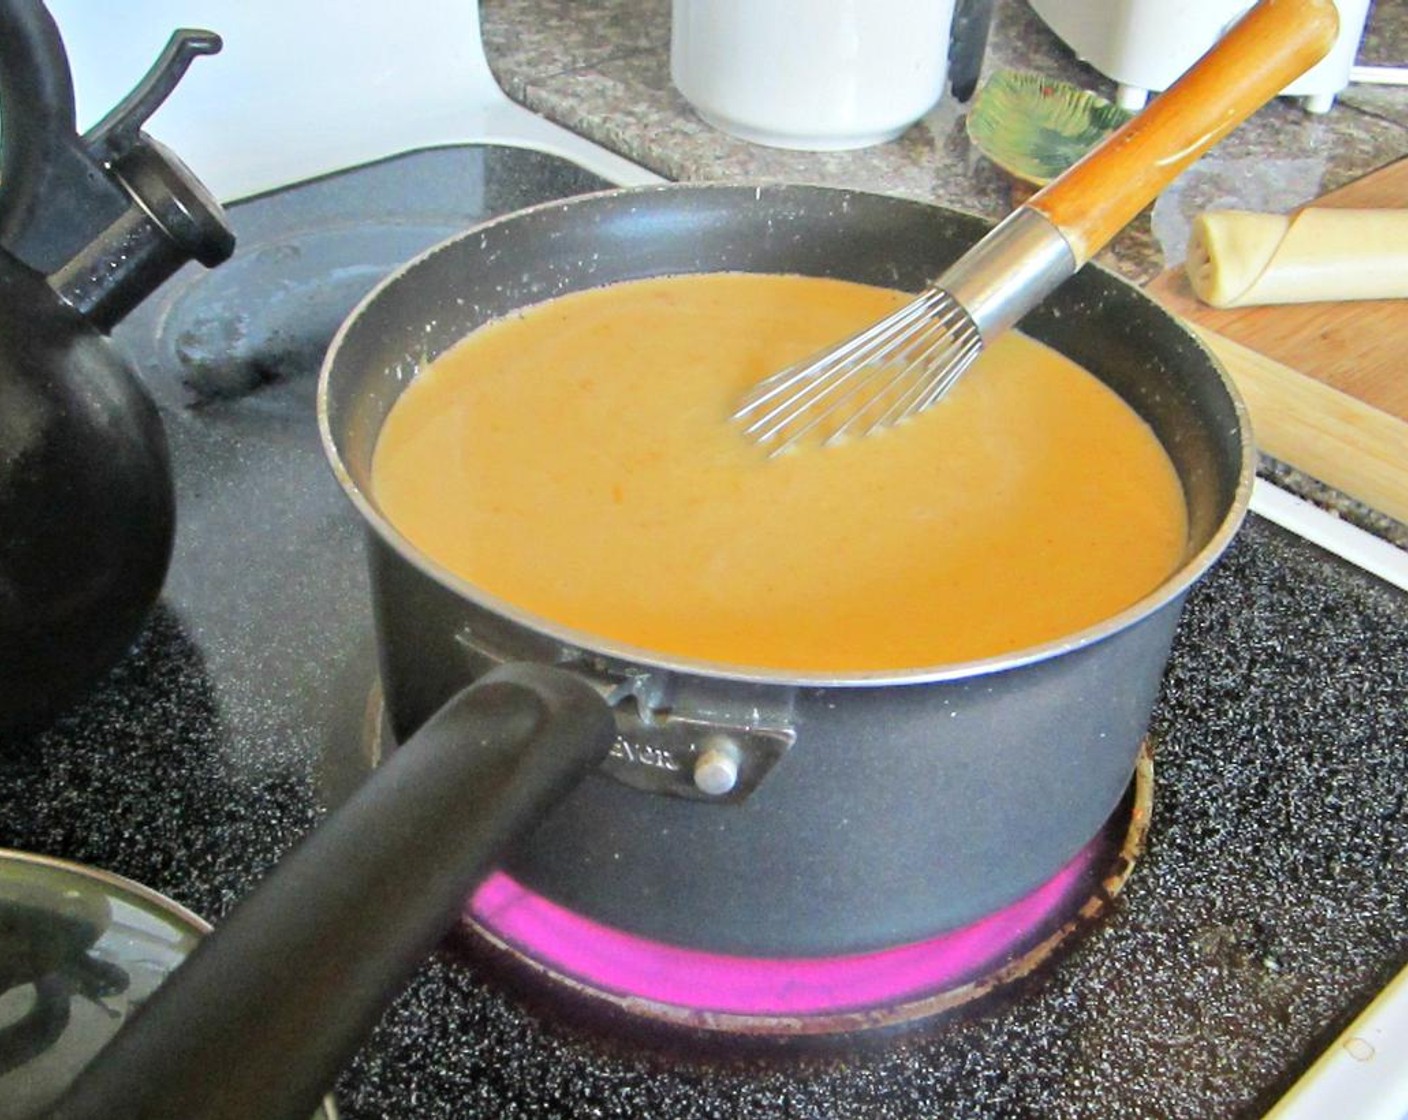 step 1 In a large pot, bring Fat-Free Evaporated Milk (2 cans), Condensed Cheddar Cheese Soup (2 cans), Water (2 1/2 cups), Salt (to taste), Ground Black Pepper (to taste), Dry Mustard (1 tsp), and Cayenne Pepper (1/8 tsp), to a simmer.